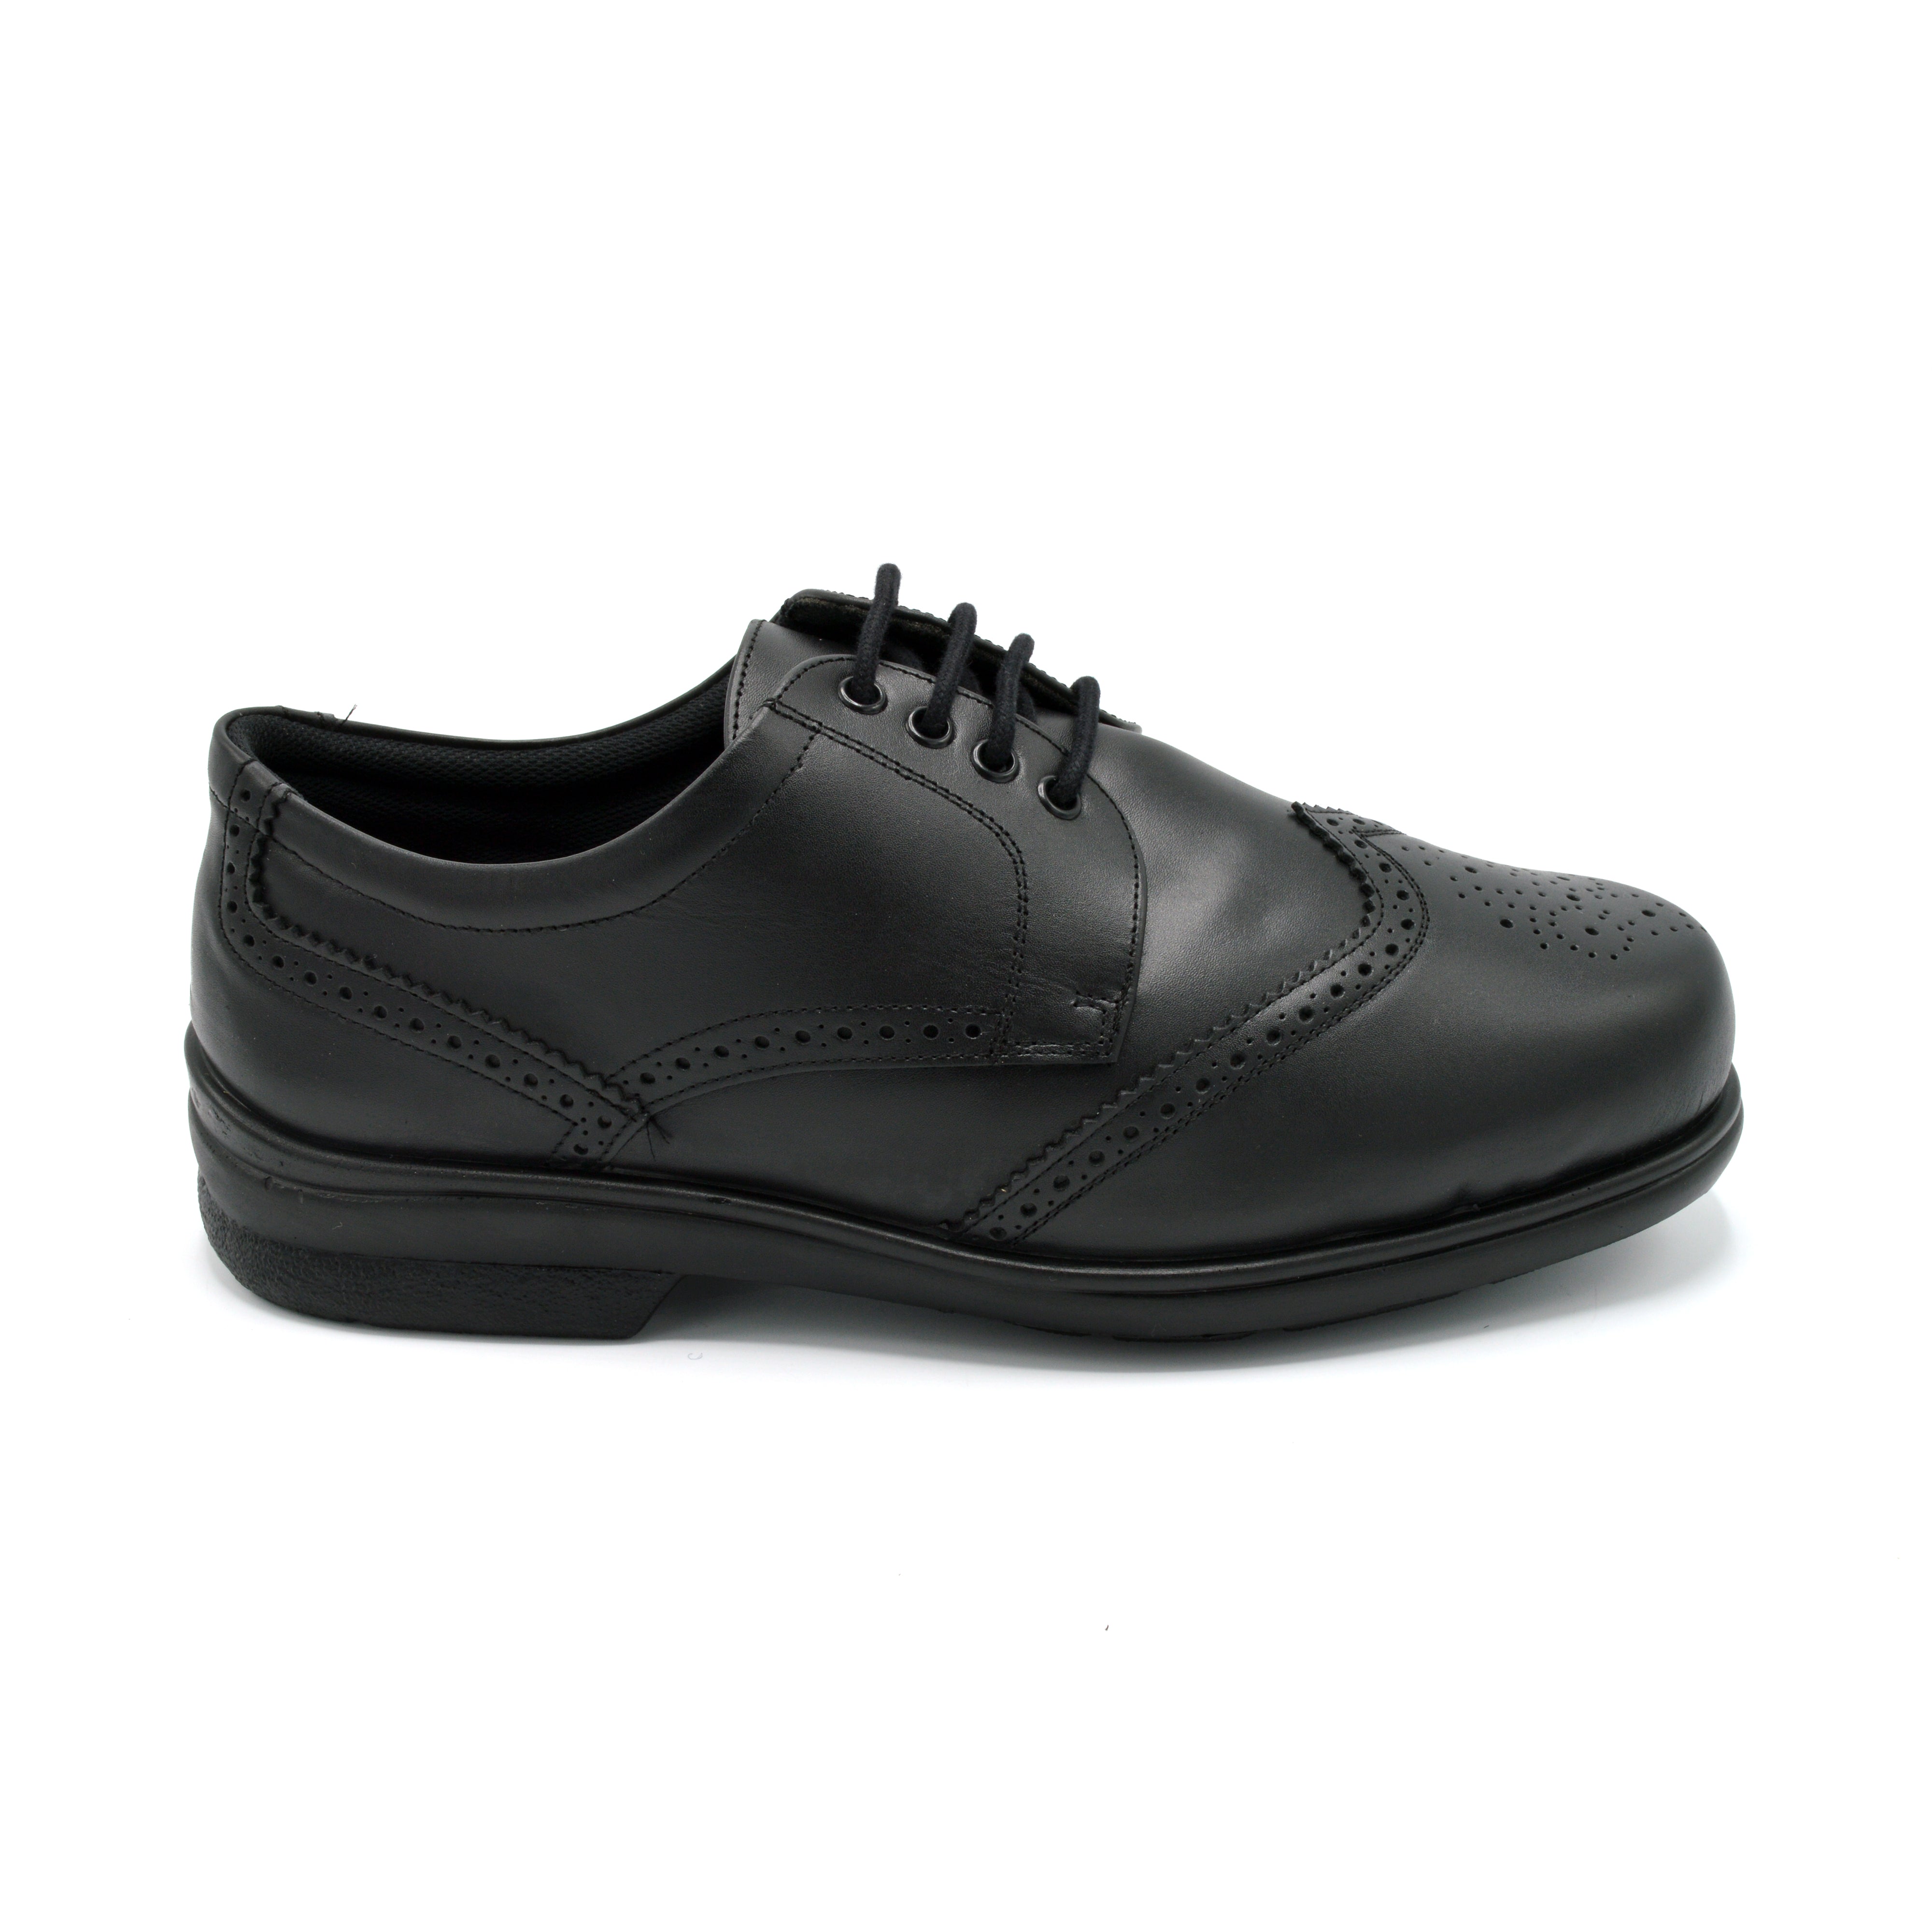 CosyFeet Darby Black Mens Wide Fit Brogue Lace Up